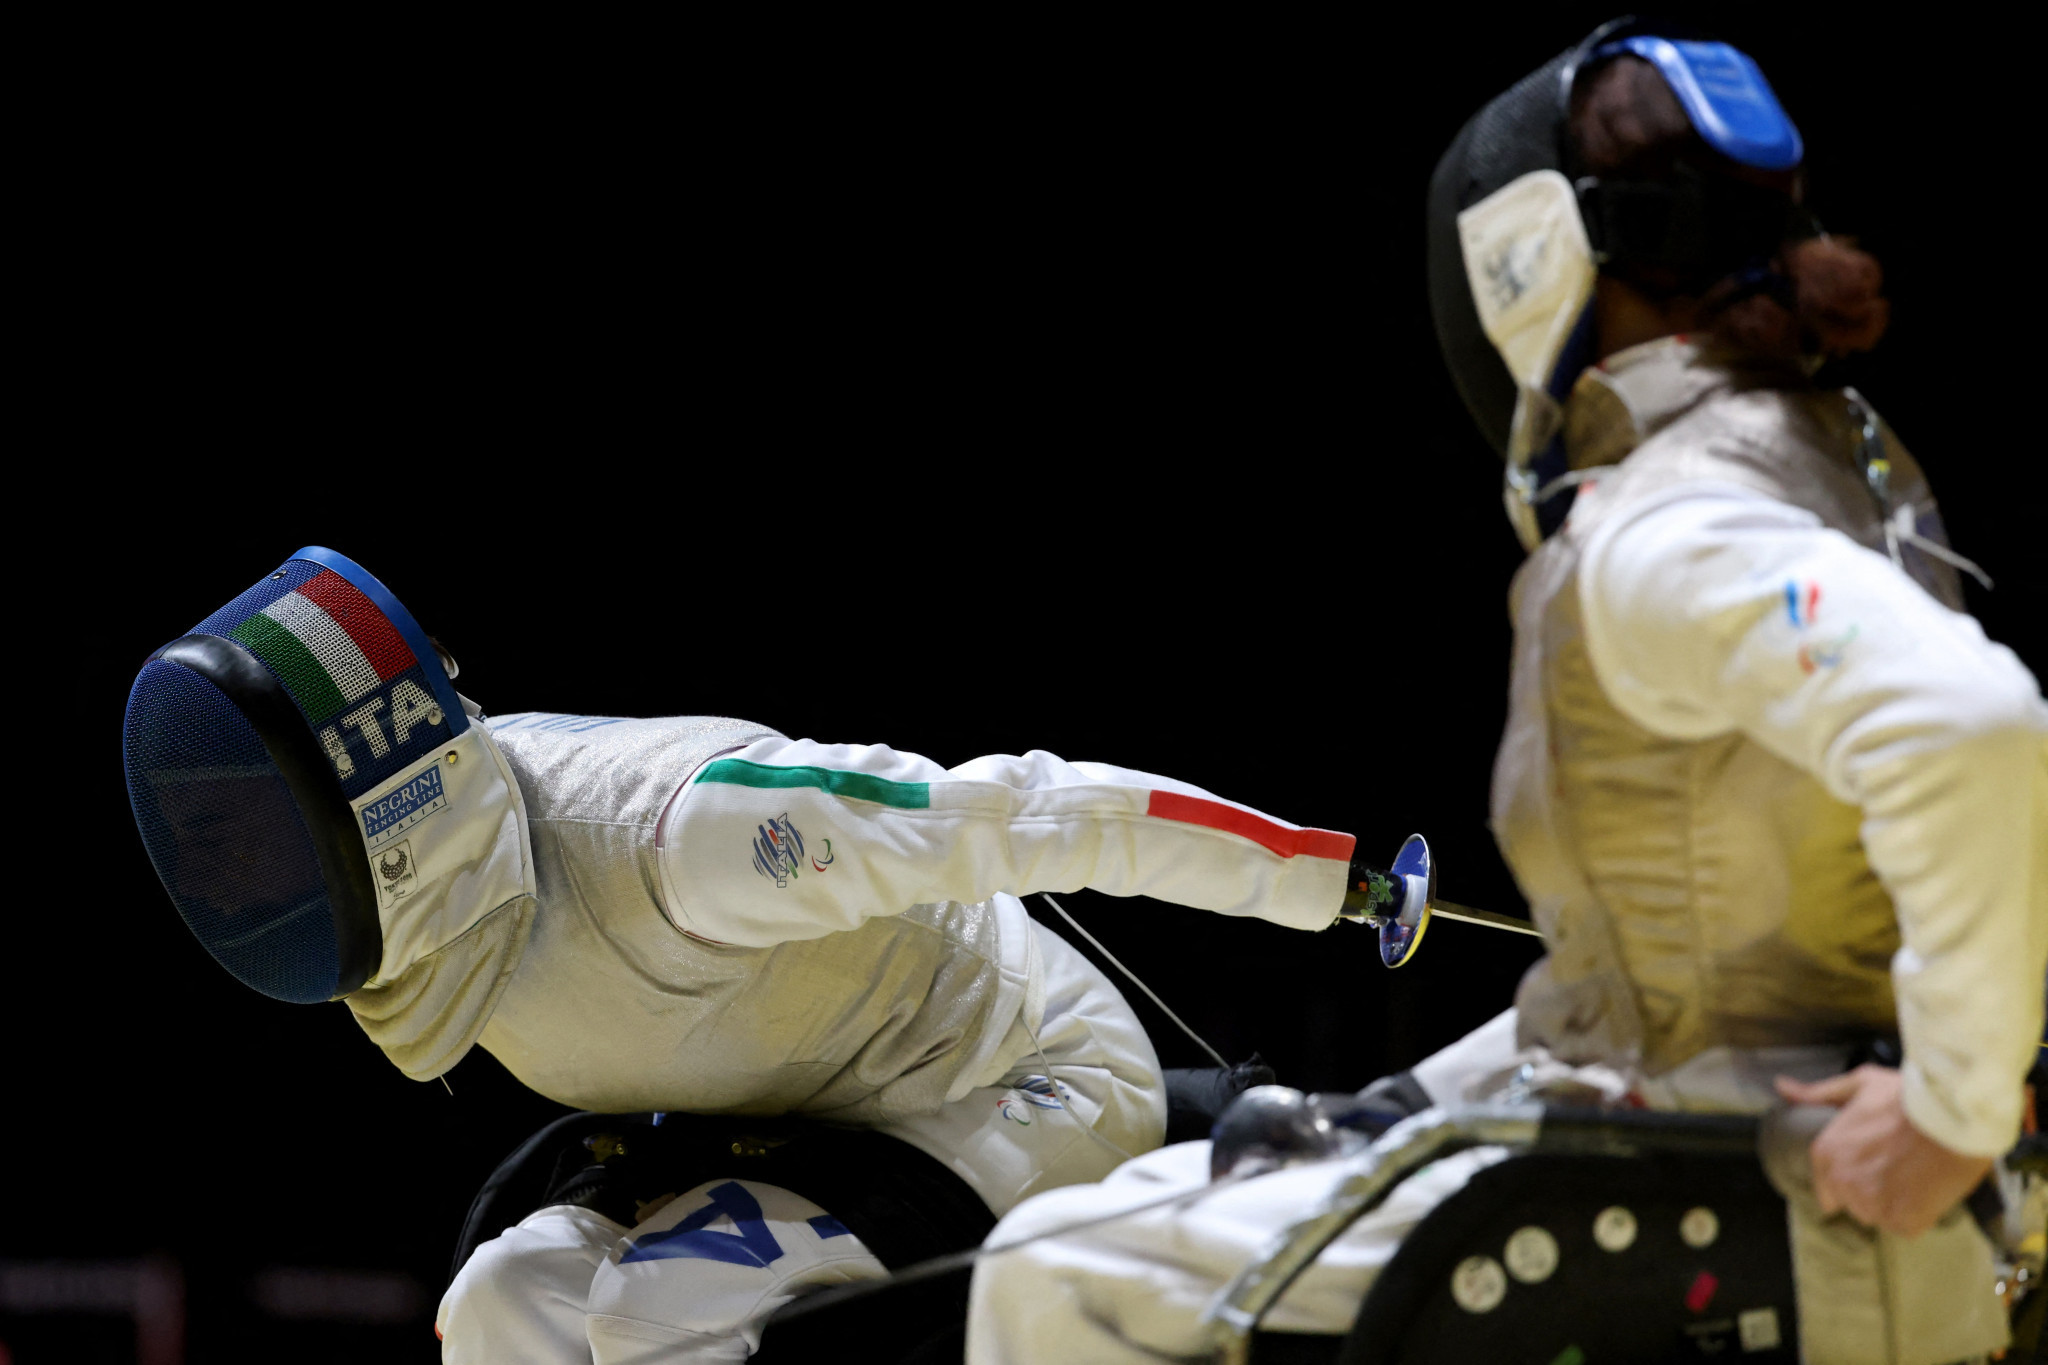 Italy won six gold medals overall at the IWAS Wheelchair Fencing World Cup in São Paulo ©Getty Images